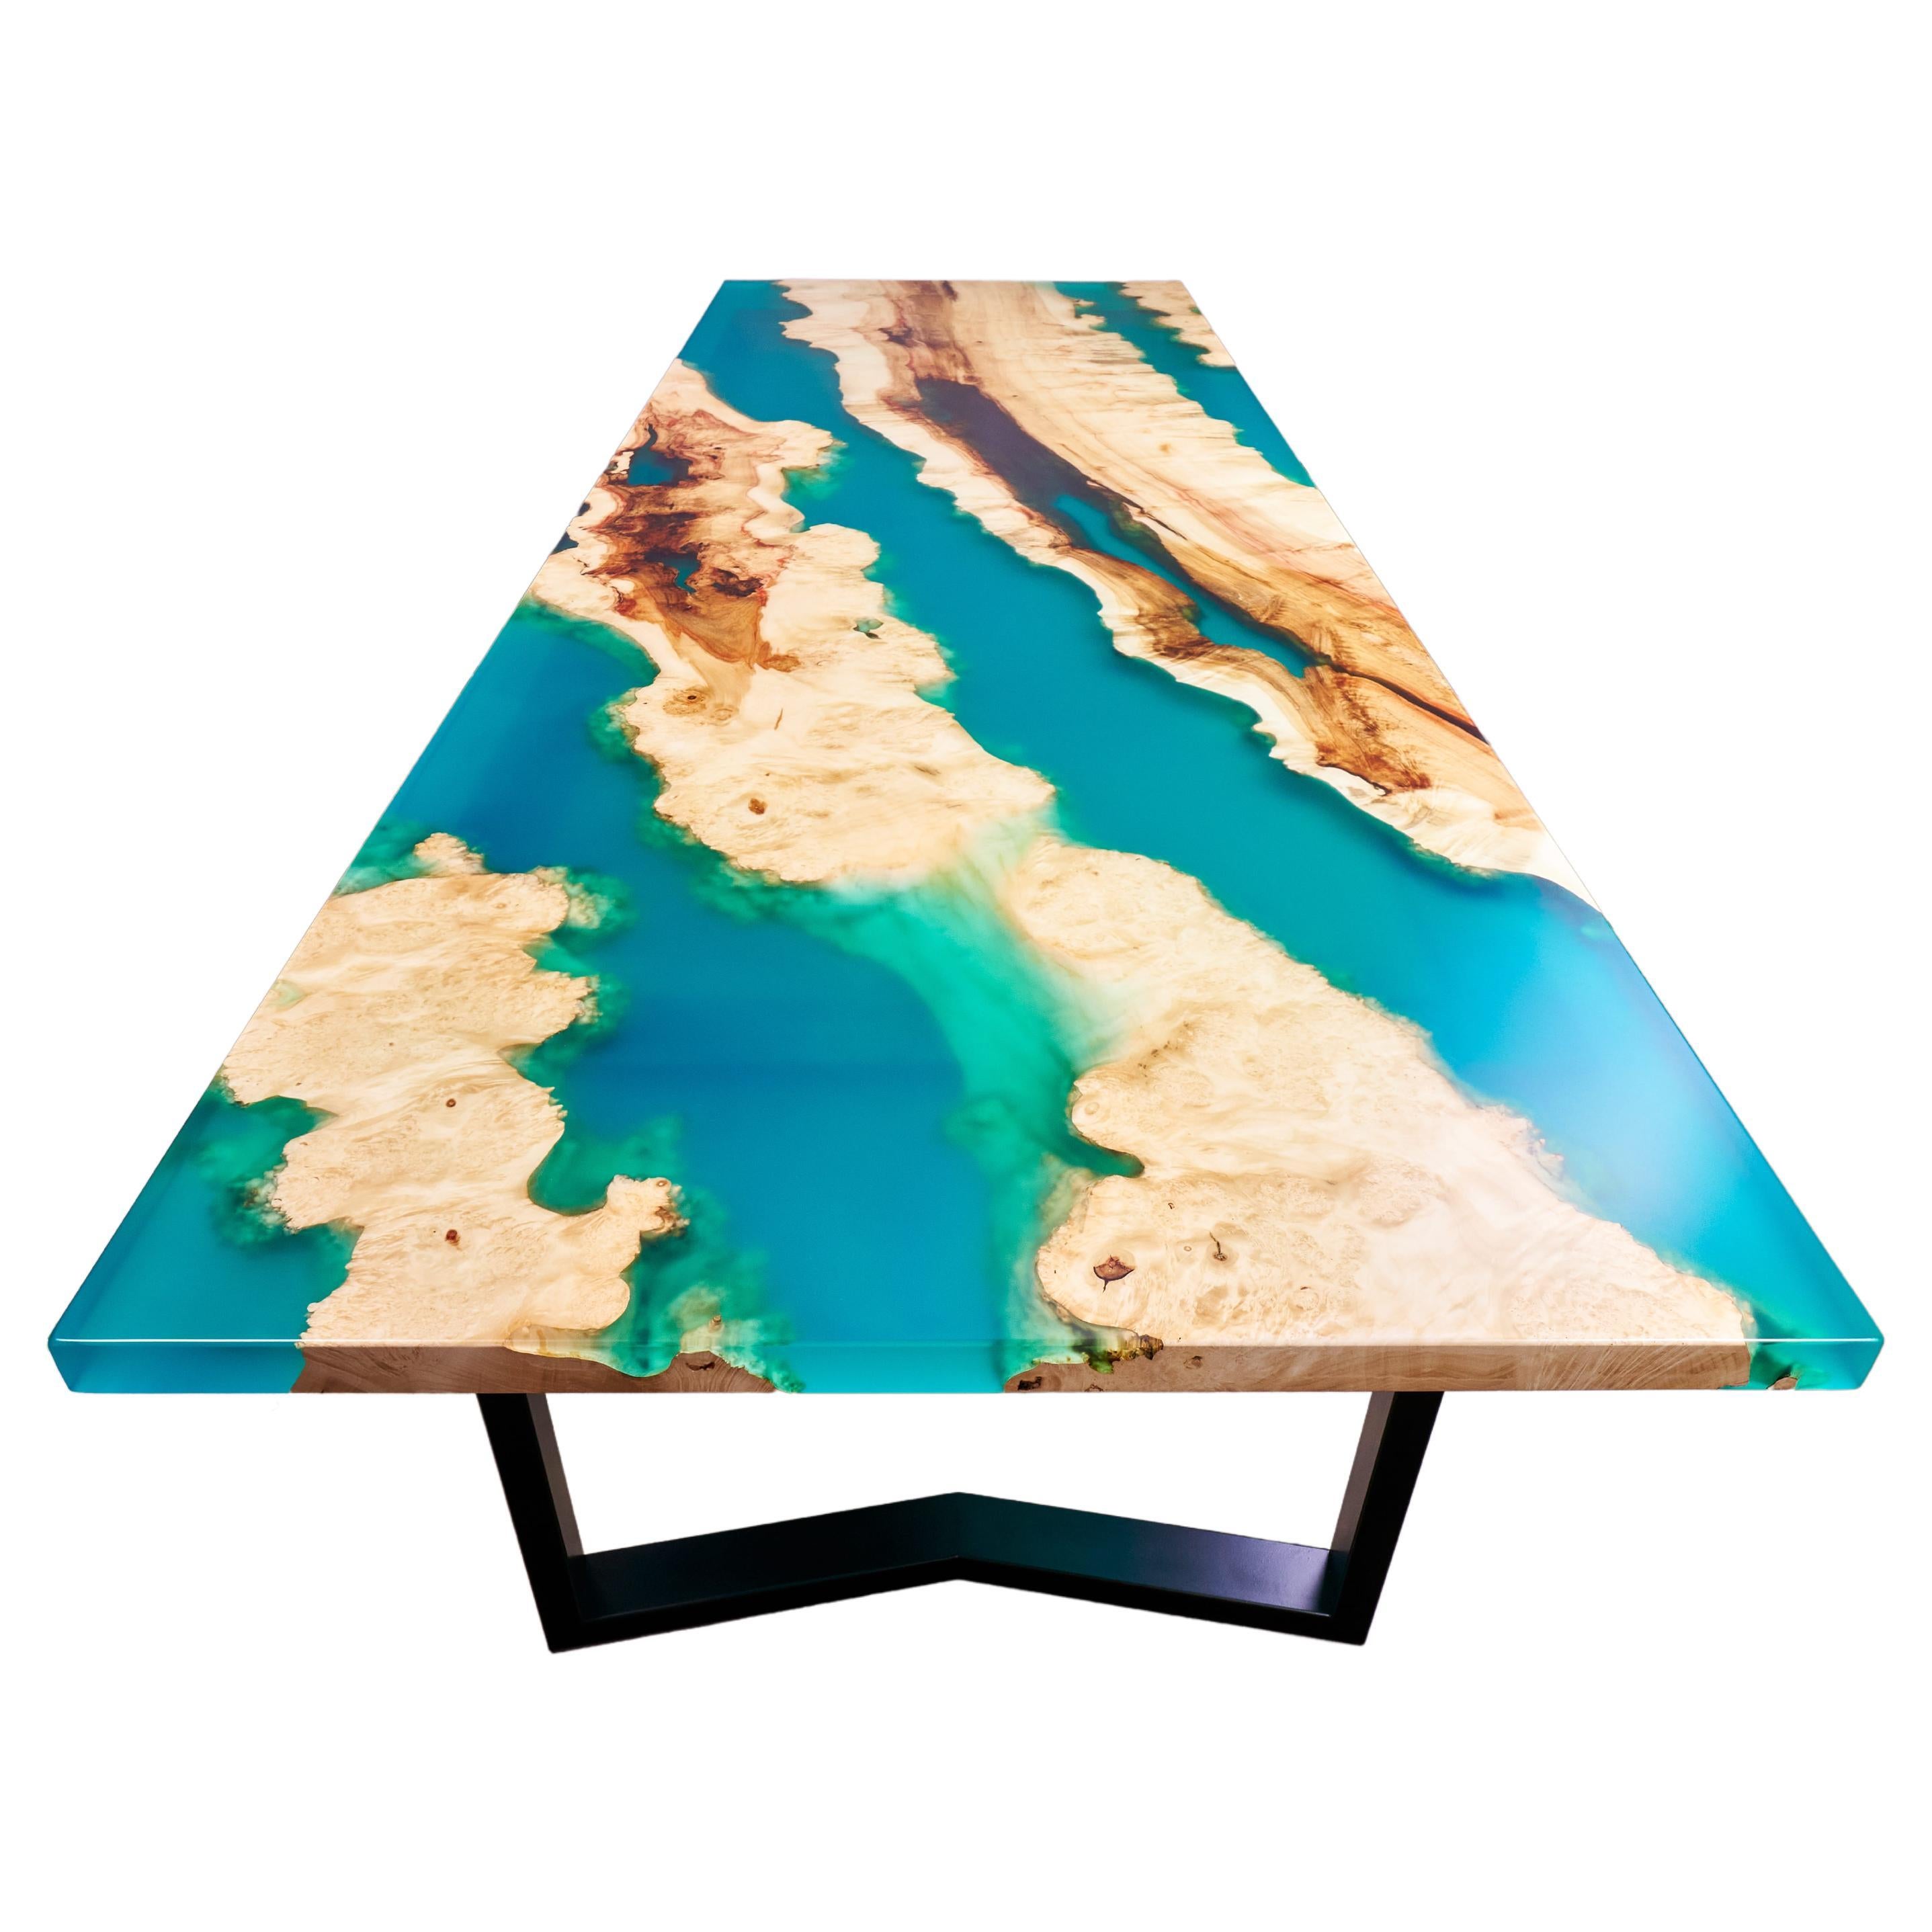 Burl Wood Dining Table Contemporary Modern Table Epoxy Resin Handmade Table